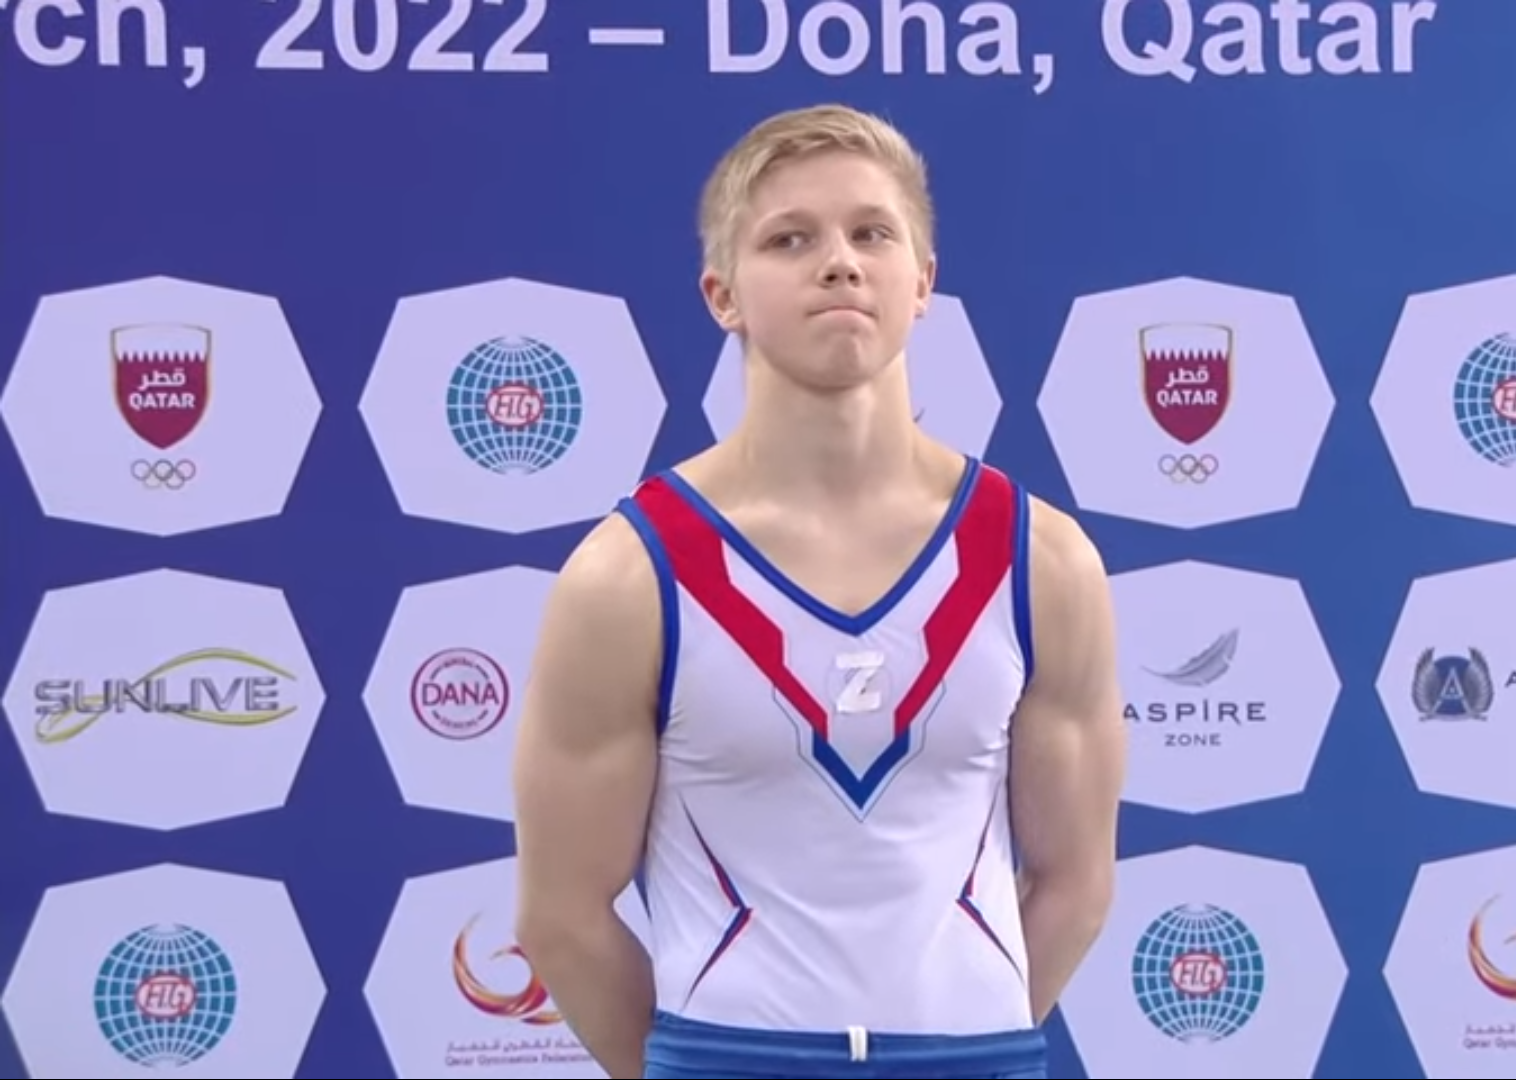 Russian gymnast Kuliak appeals against suspension for sporting "Z" symbol